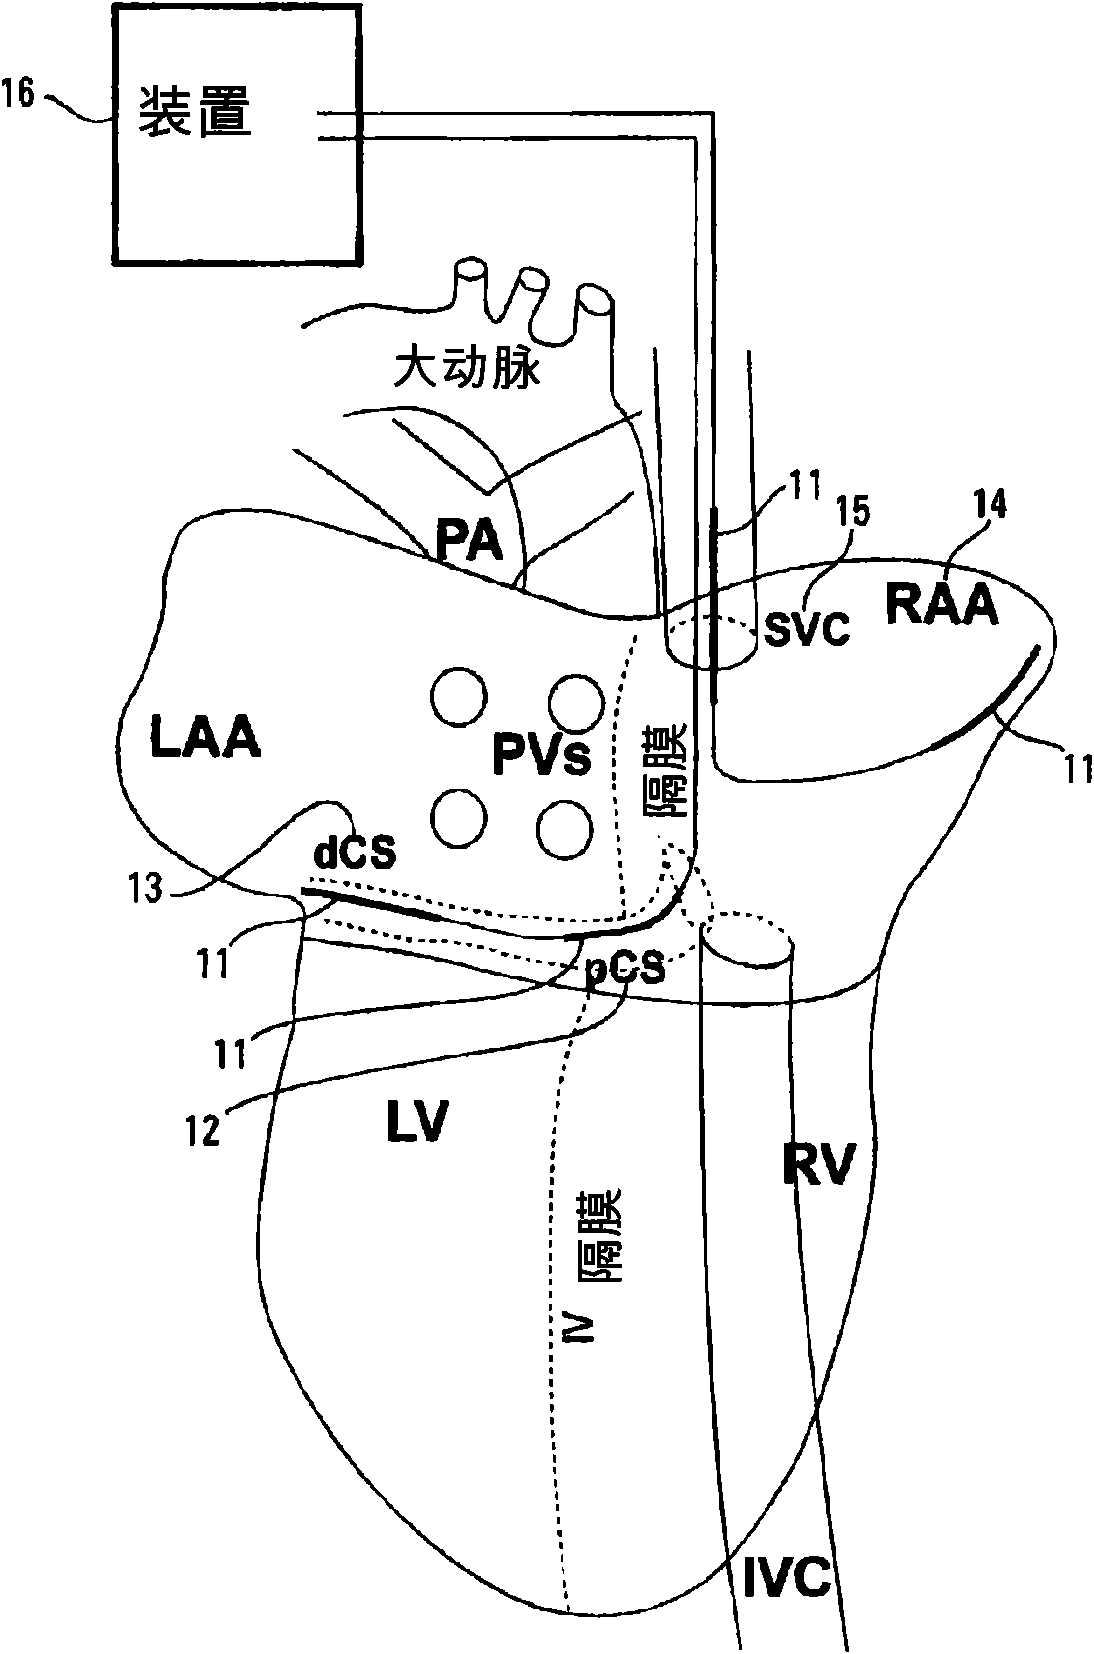 Method and device for low-energy termination of atrial tachyarrhythmias